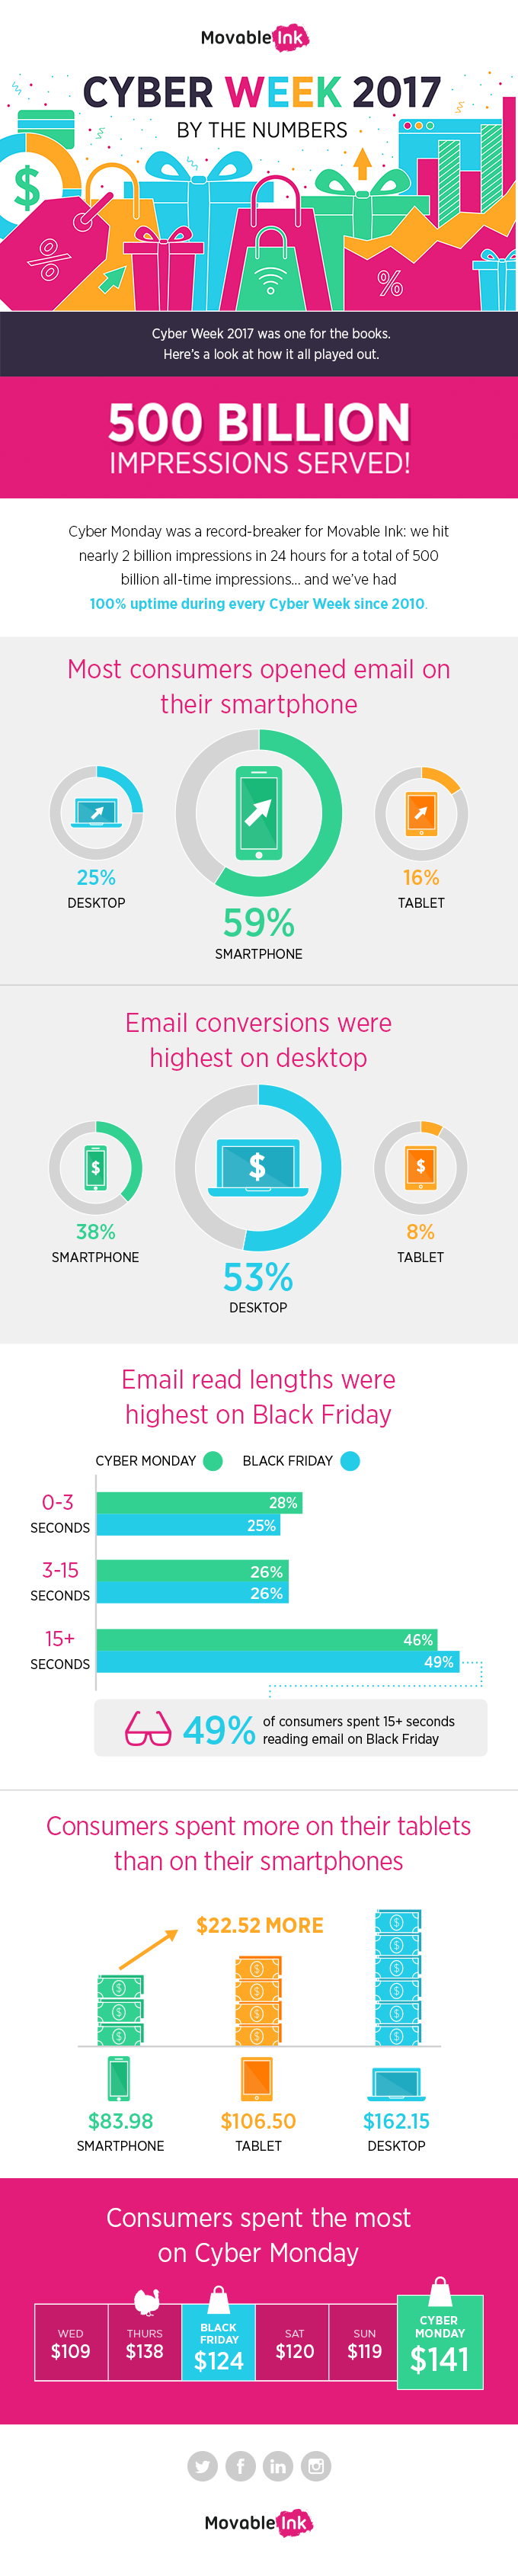 Cyber Week Email Report [Infographic]